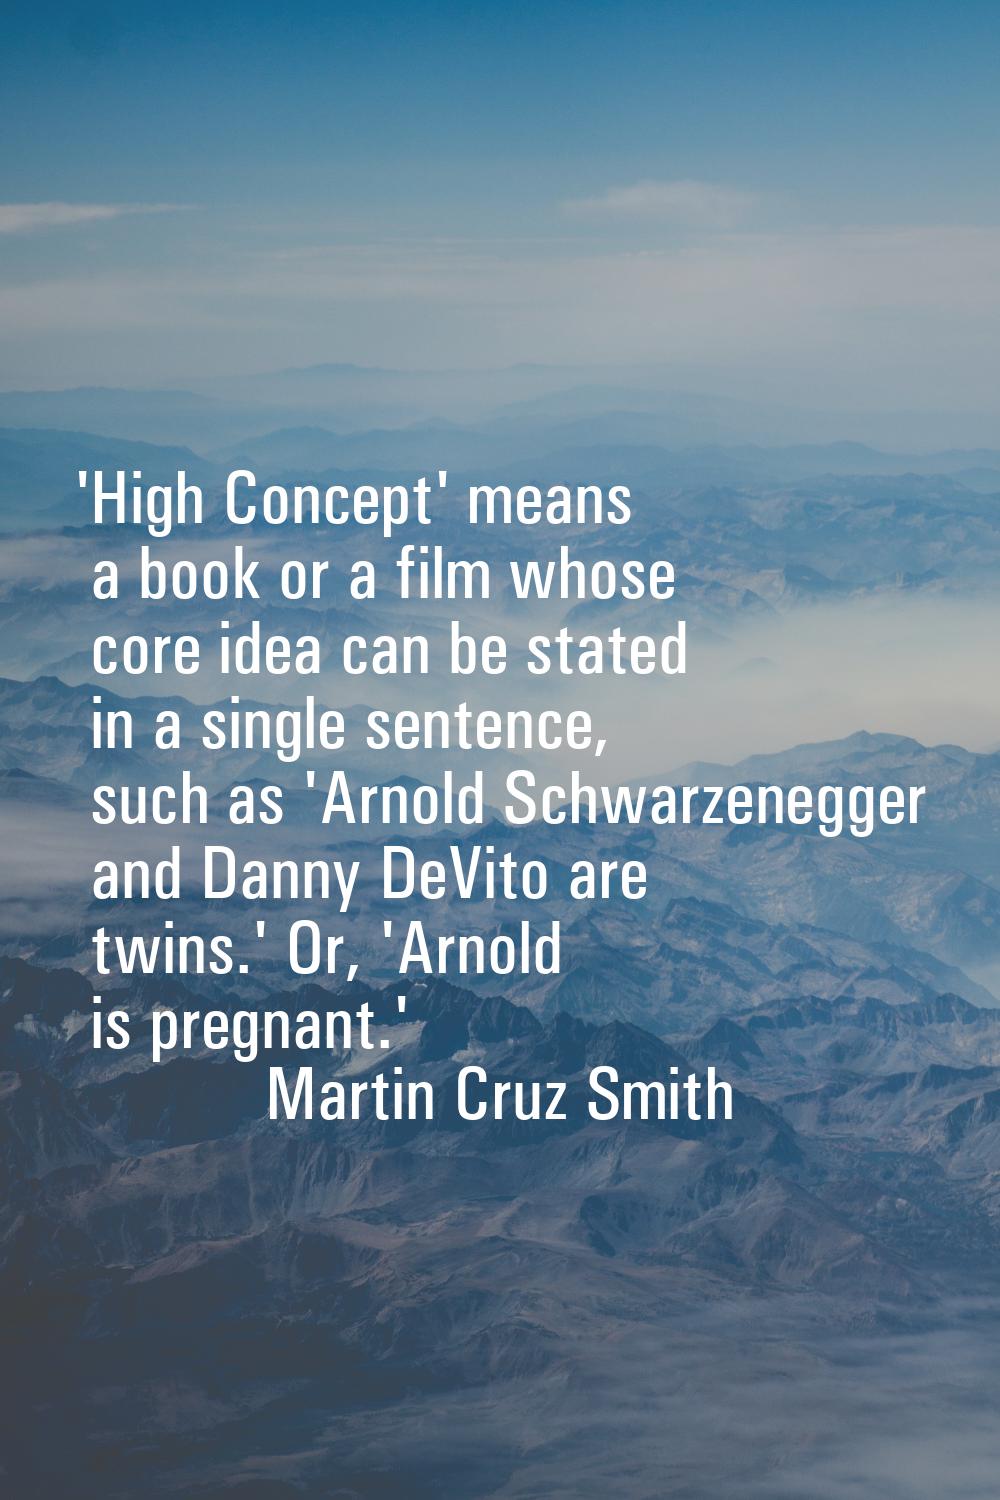 'High Concept' means a book or a film whose core idea can be stated in a single sentence, such as '